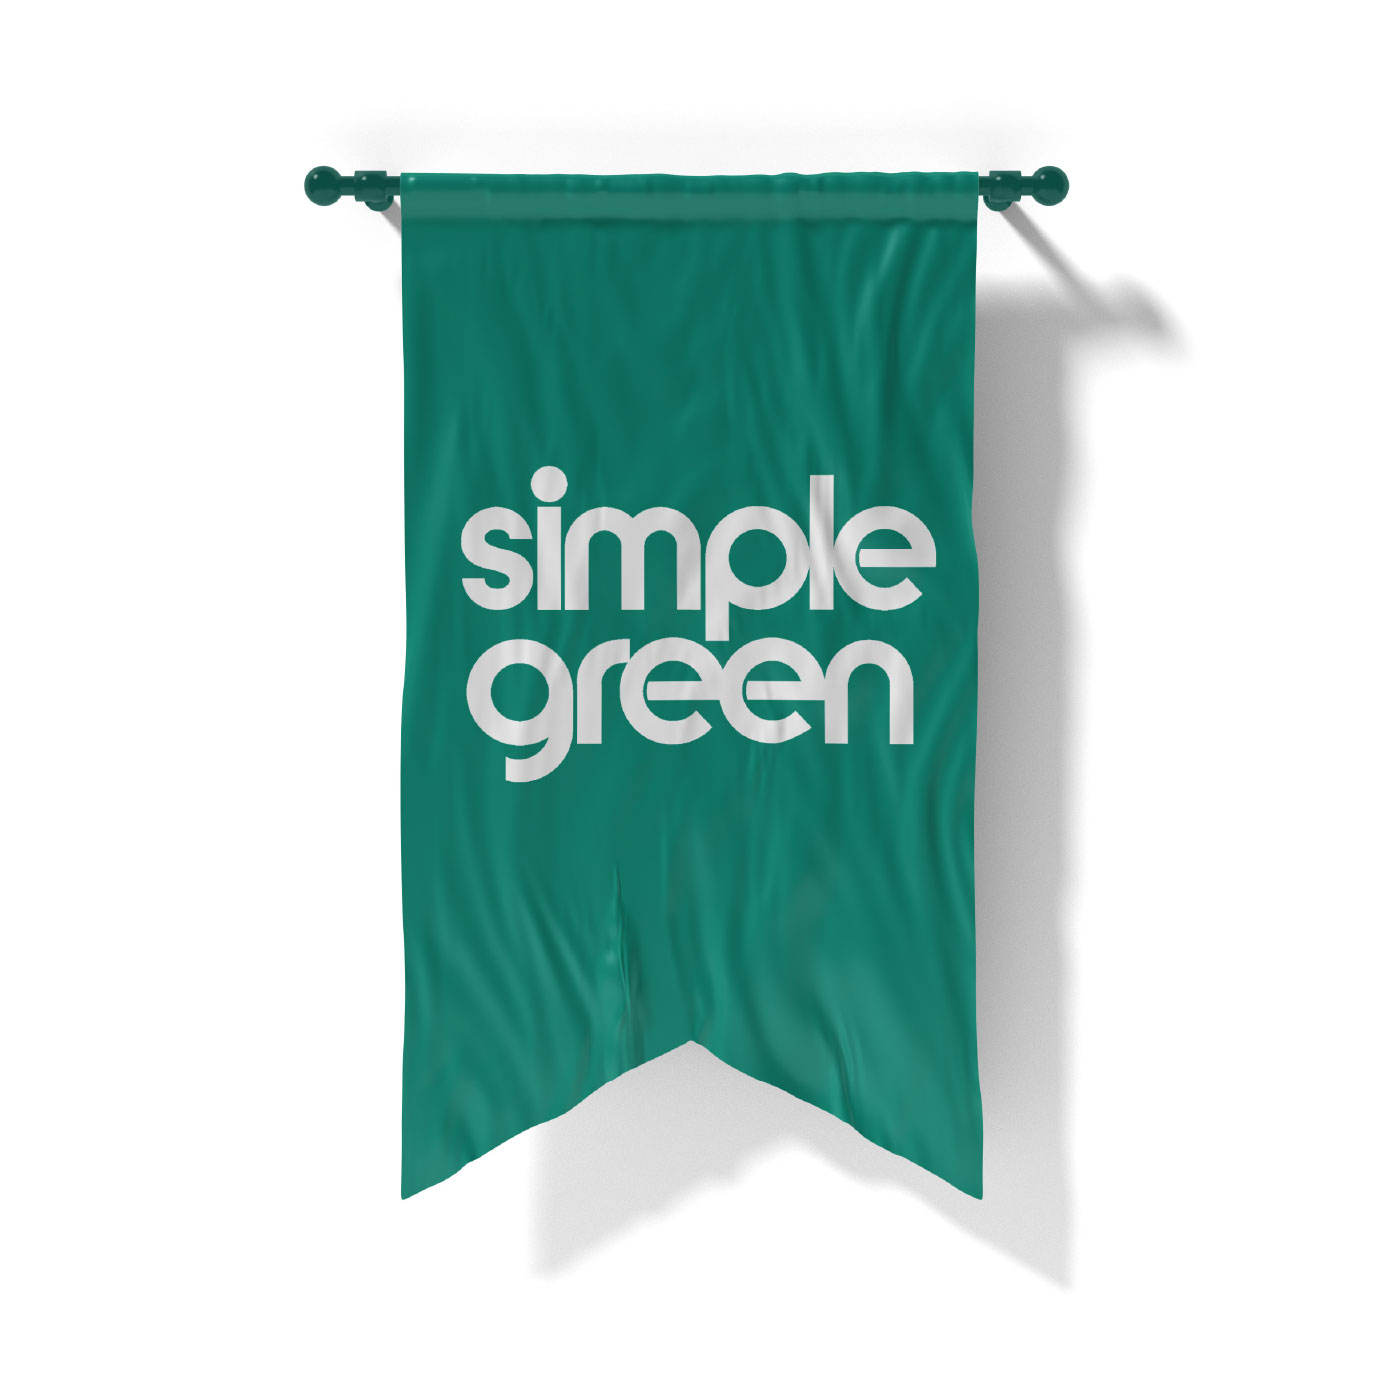 Simple Green All-Purpose Cleaner